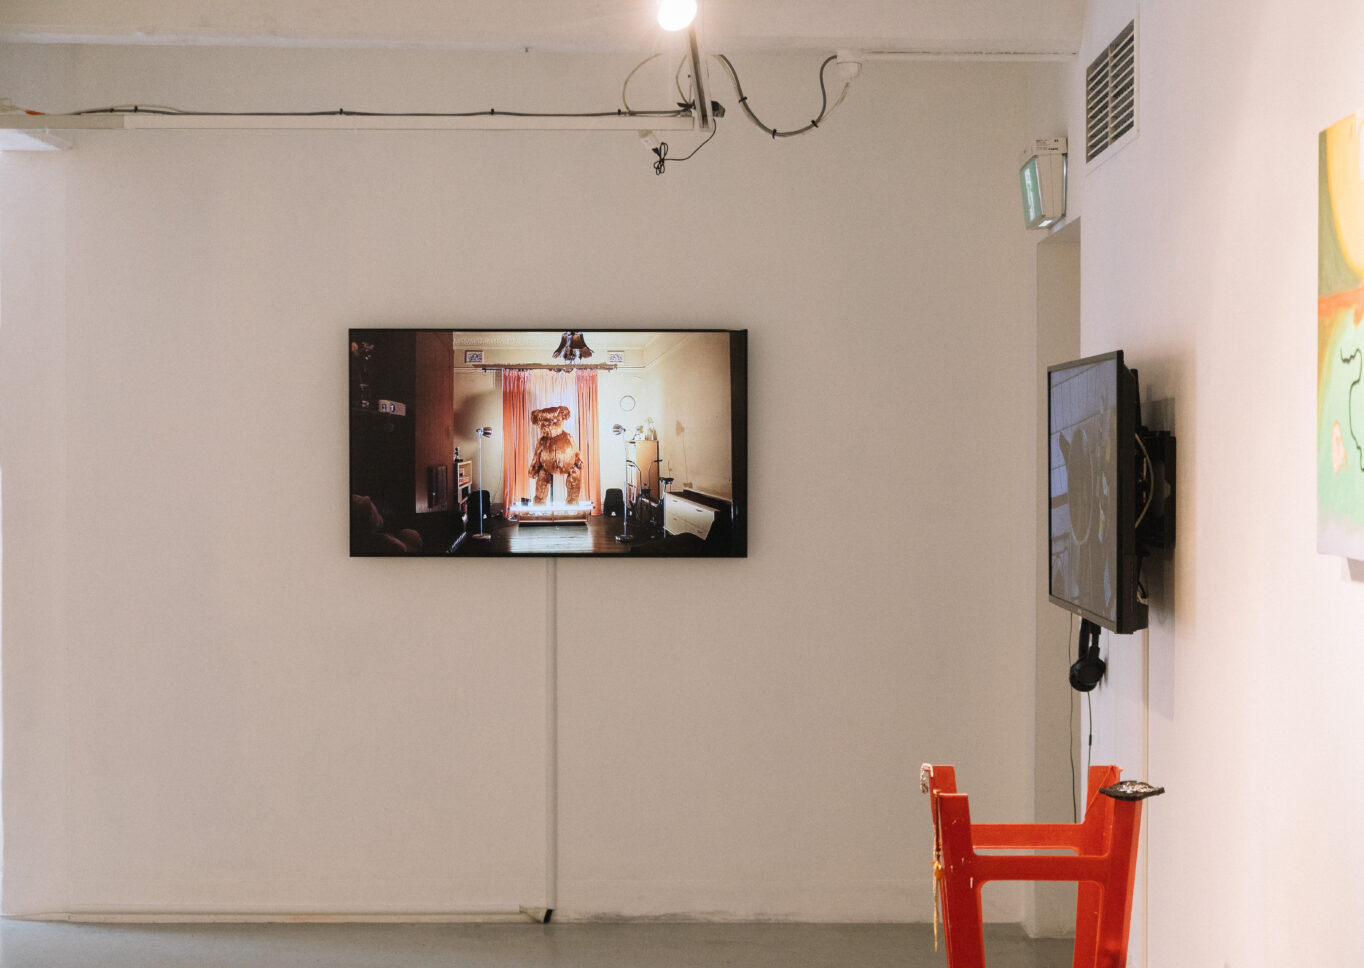 Installation documentation showing a teddy bear on a wall mounted screen and some paintings and sculpture.